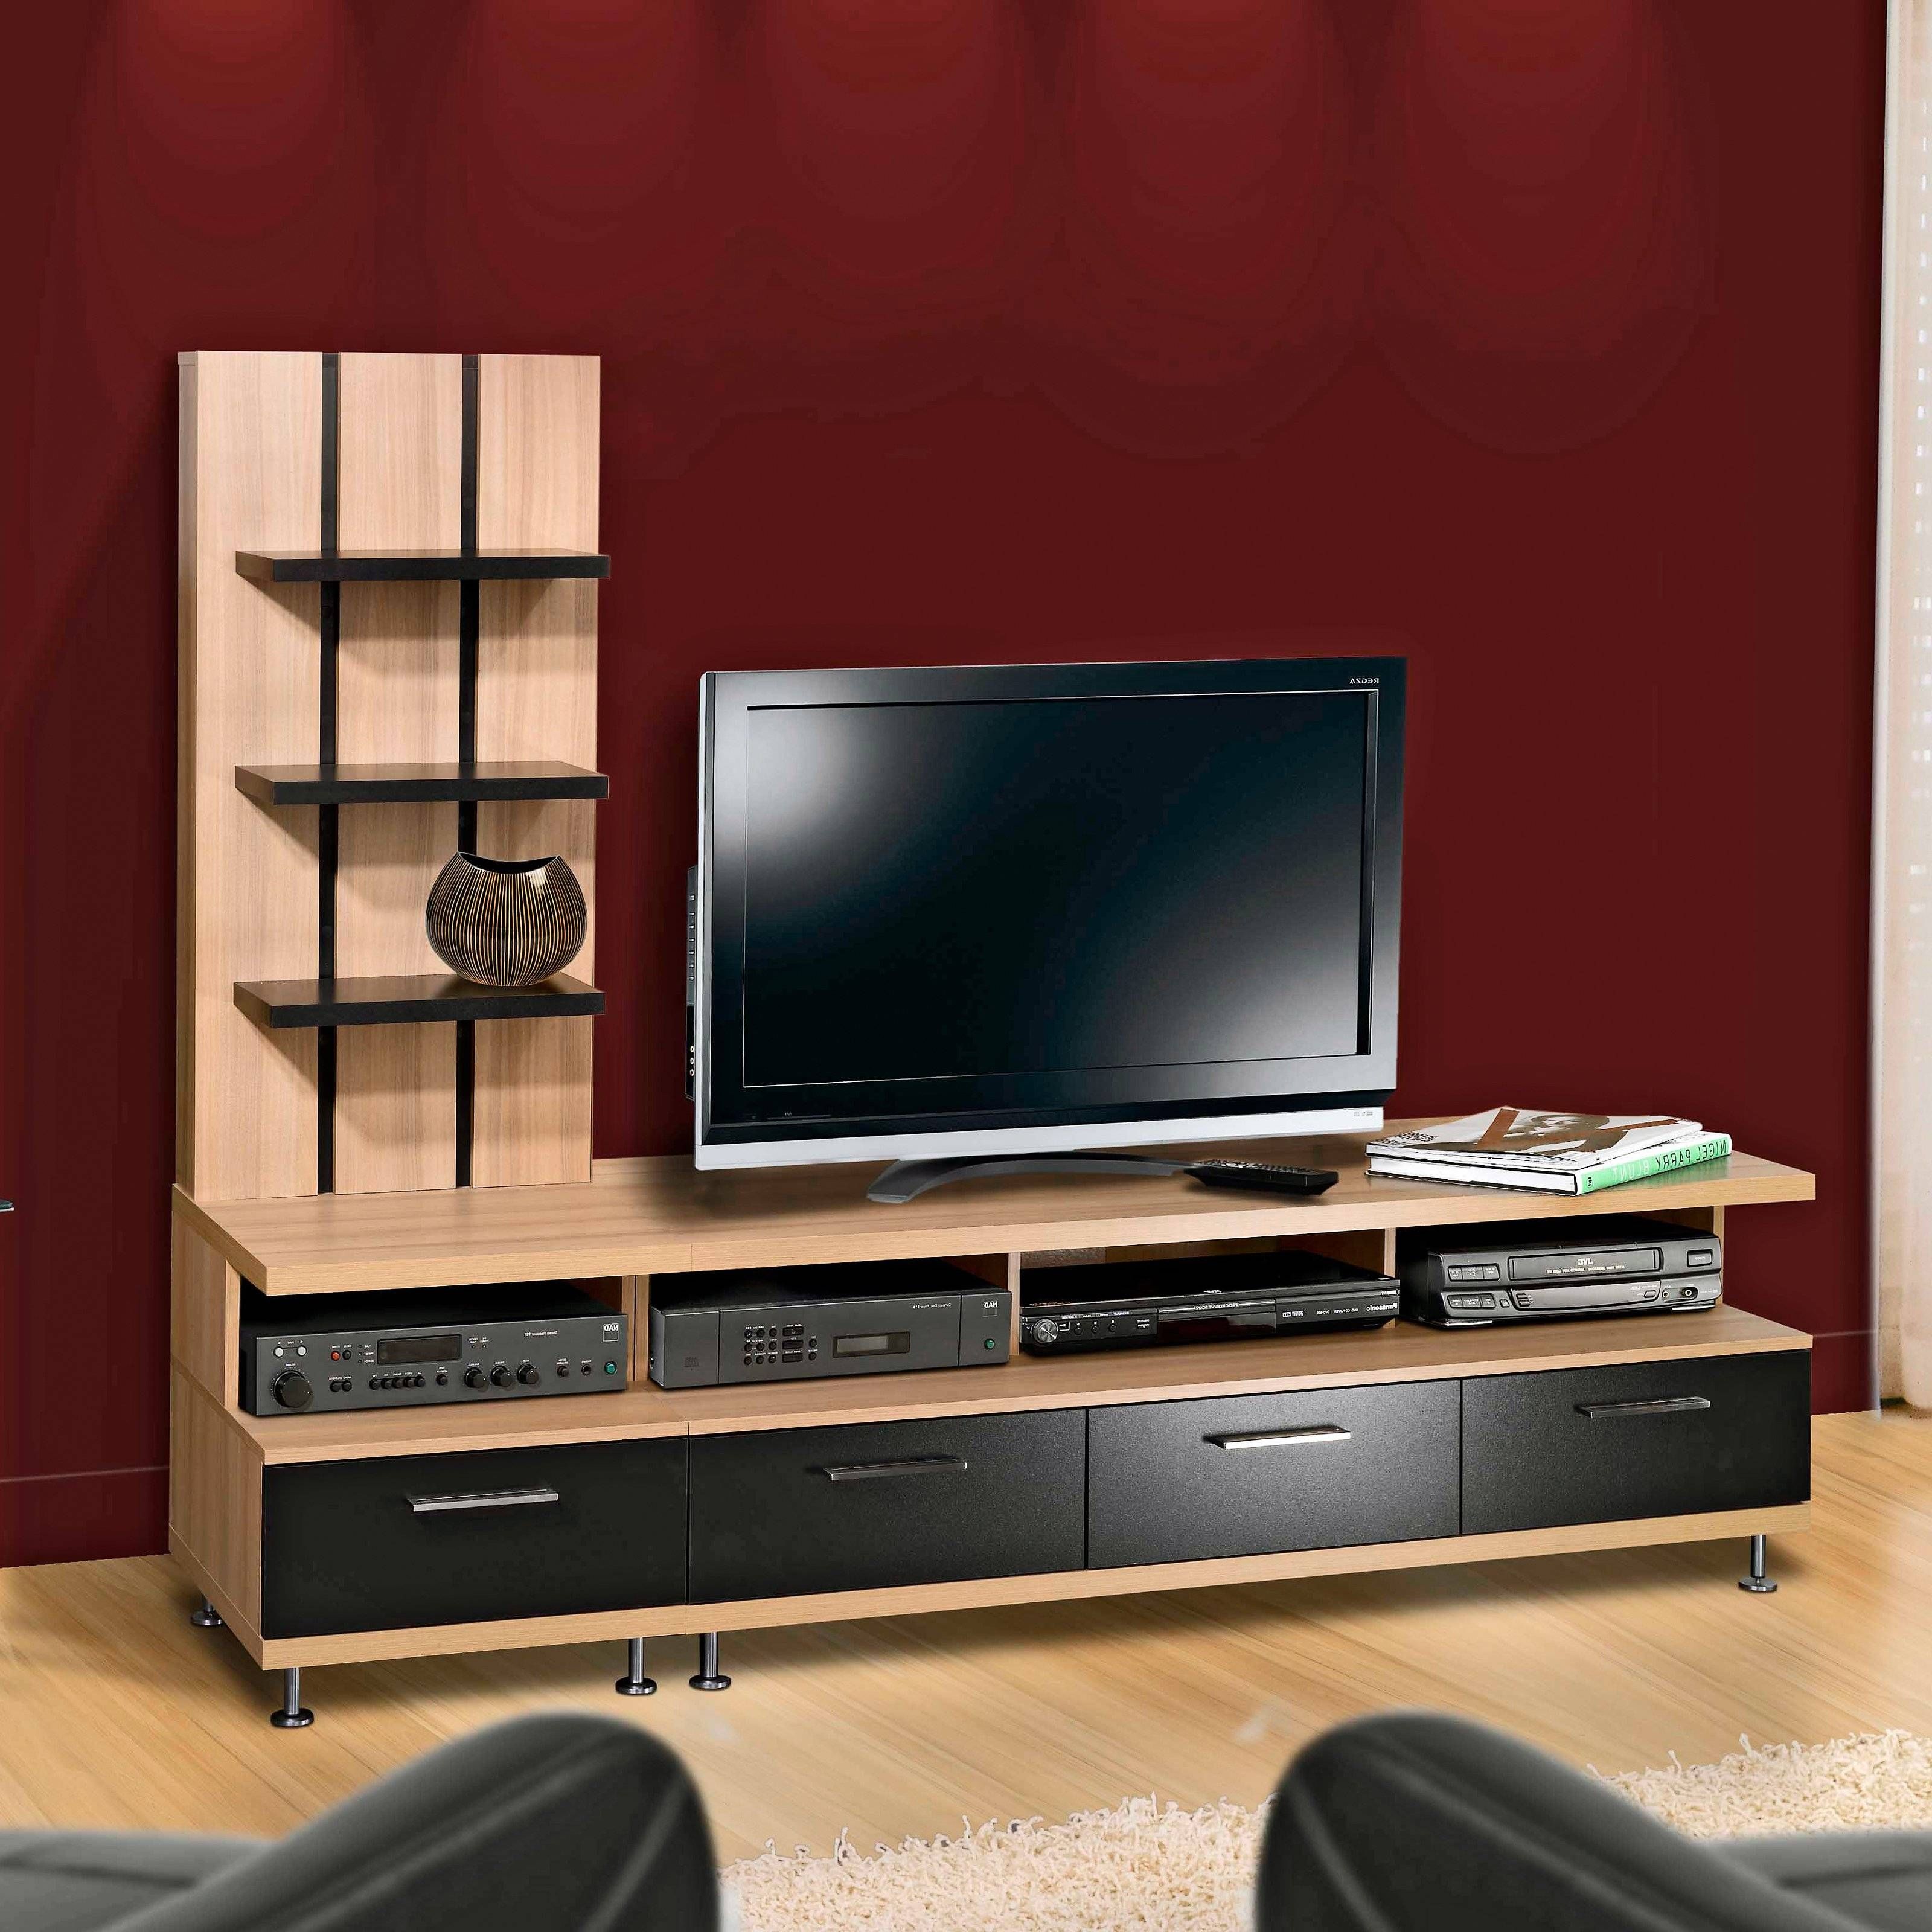 Furniture. The Modern Tv Stands For Flat Screens For More Secure Pertaining To Unique Tv Stands For Flat Screens (Photo 11 of 15)